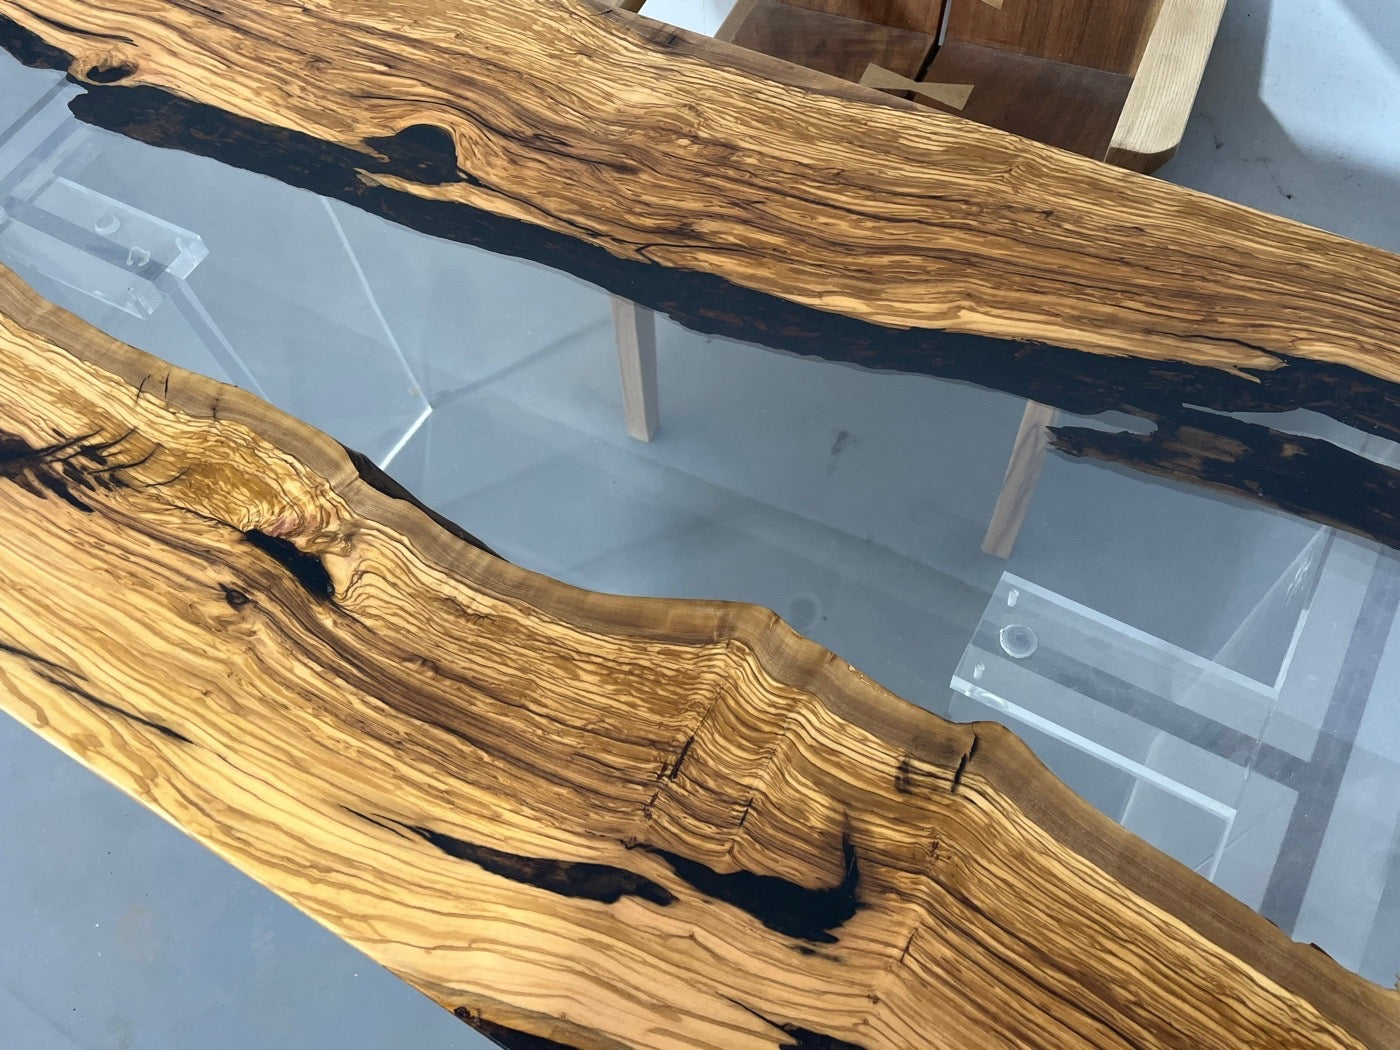 Oliven Epoxy Table, Olive Wood River Table, Poplar Epoxy Table